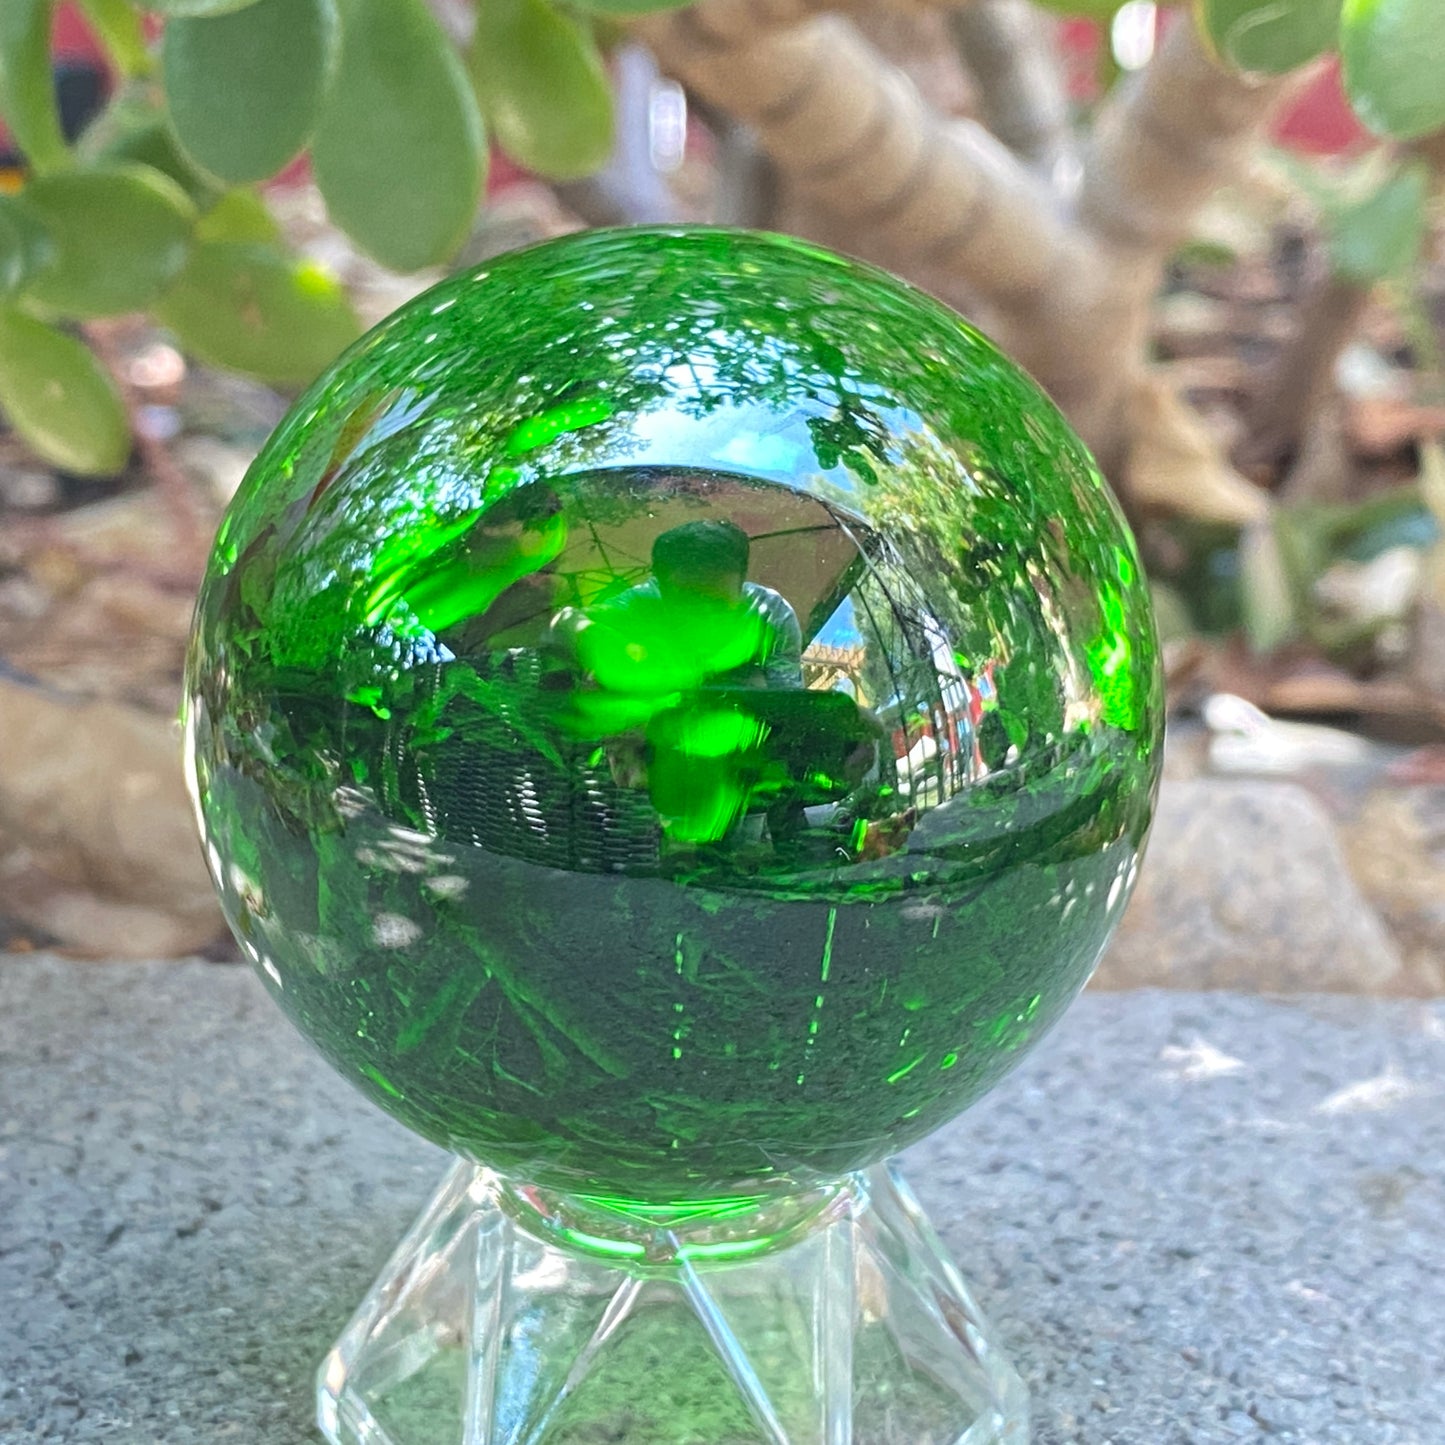 Green Obsidian gemstone sphere with stand